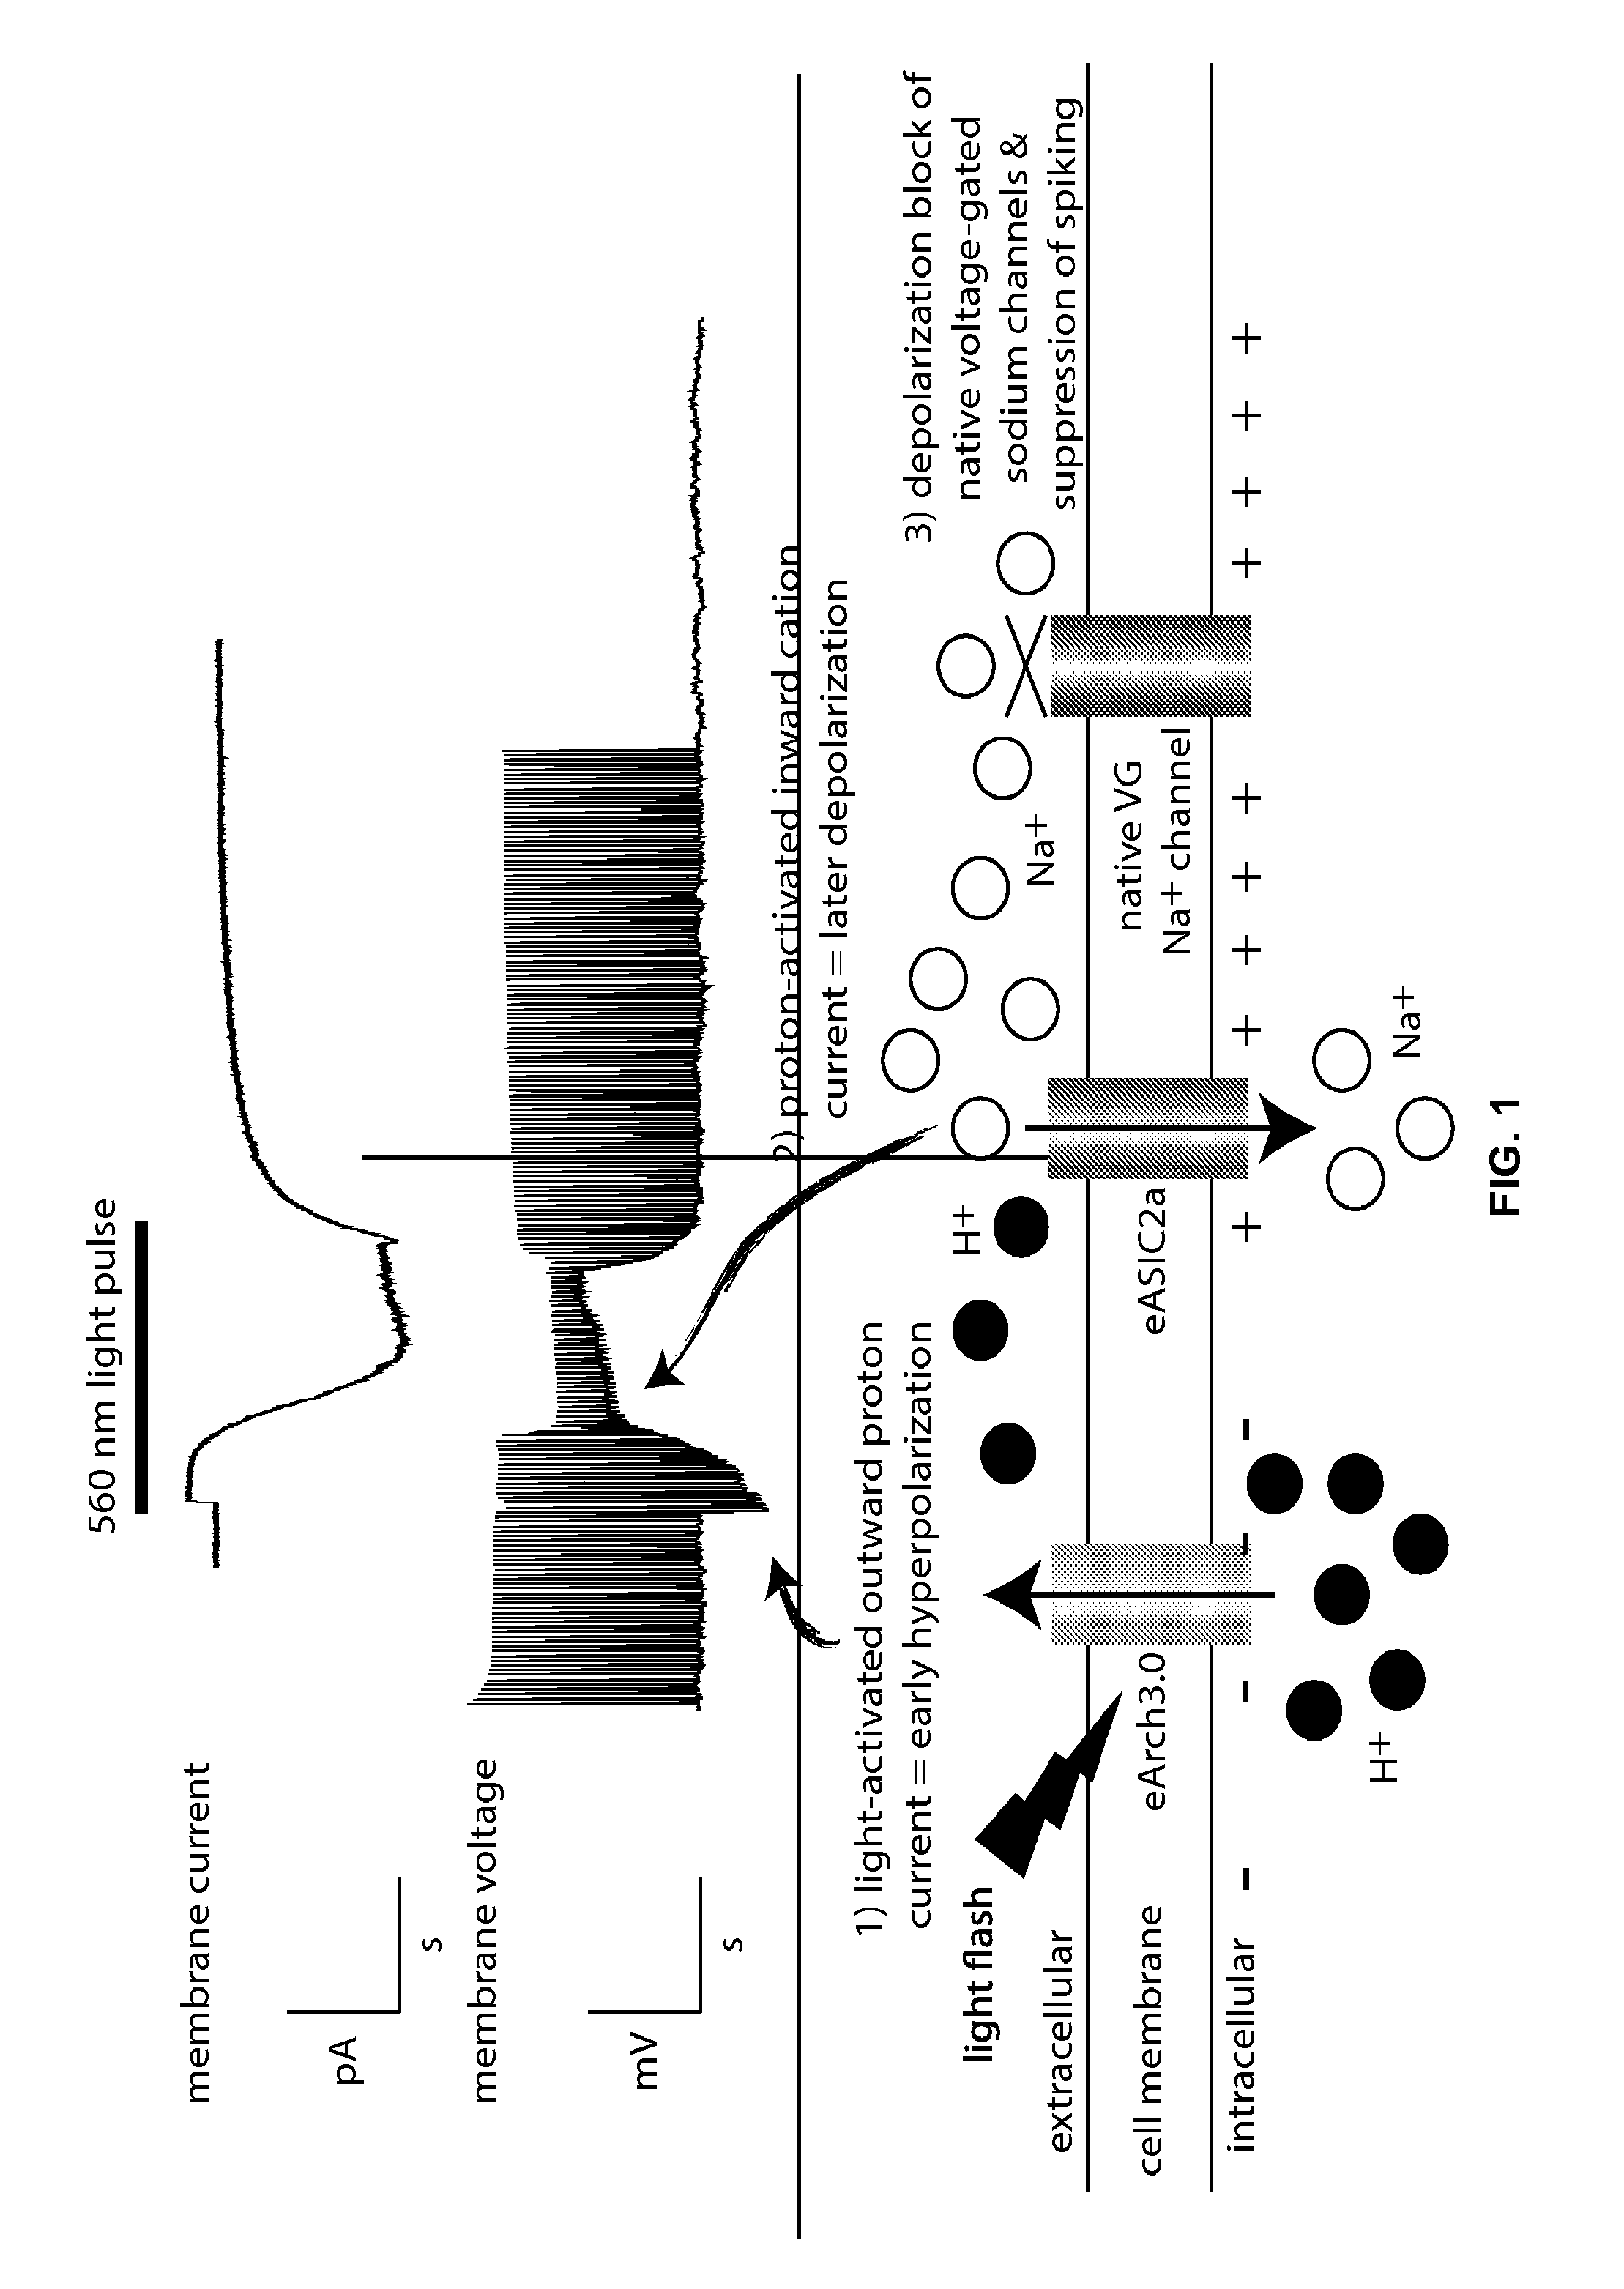 Devices, systems and methods for optogenetic modulation of action potentials in target cells